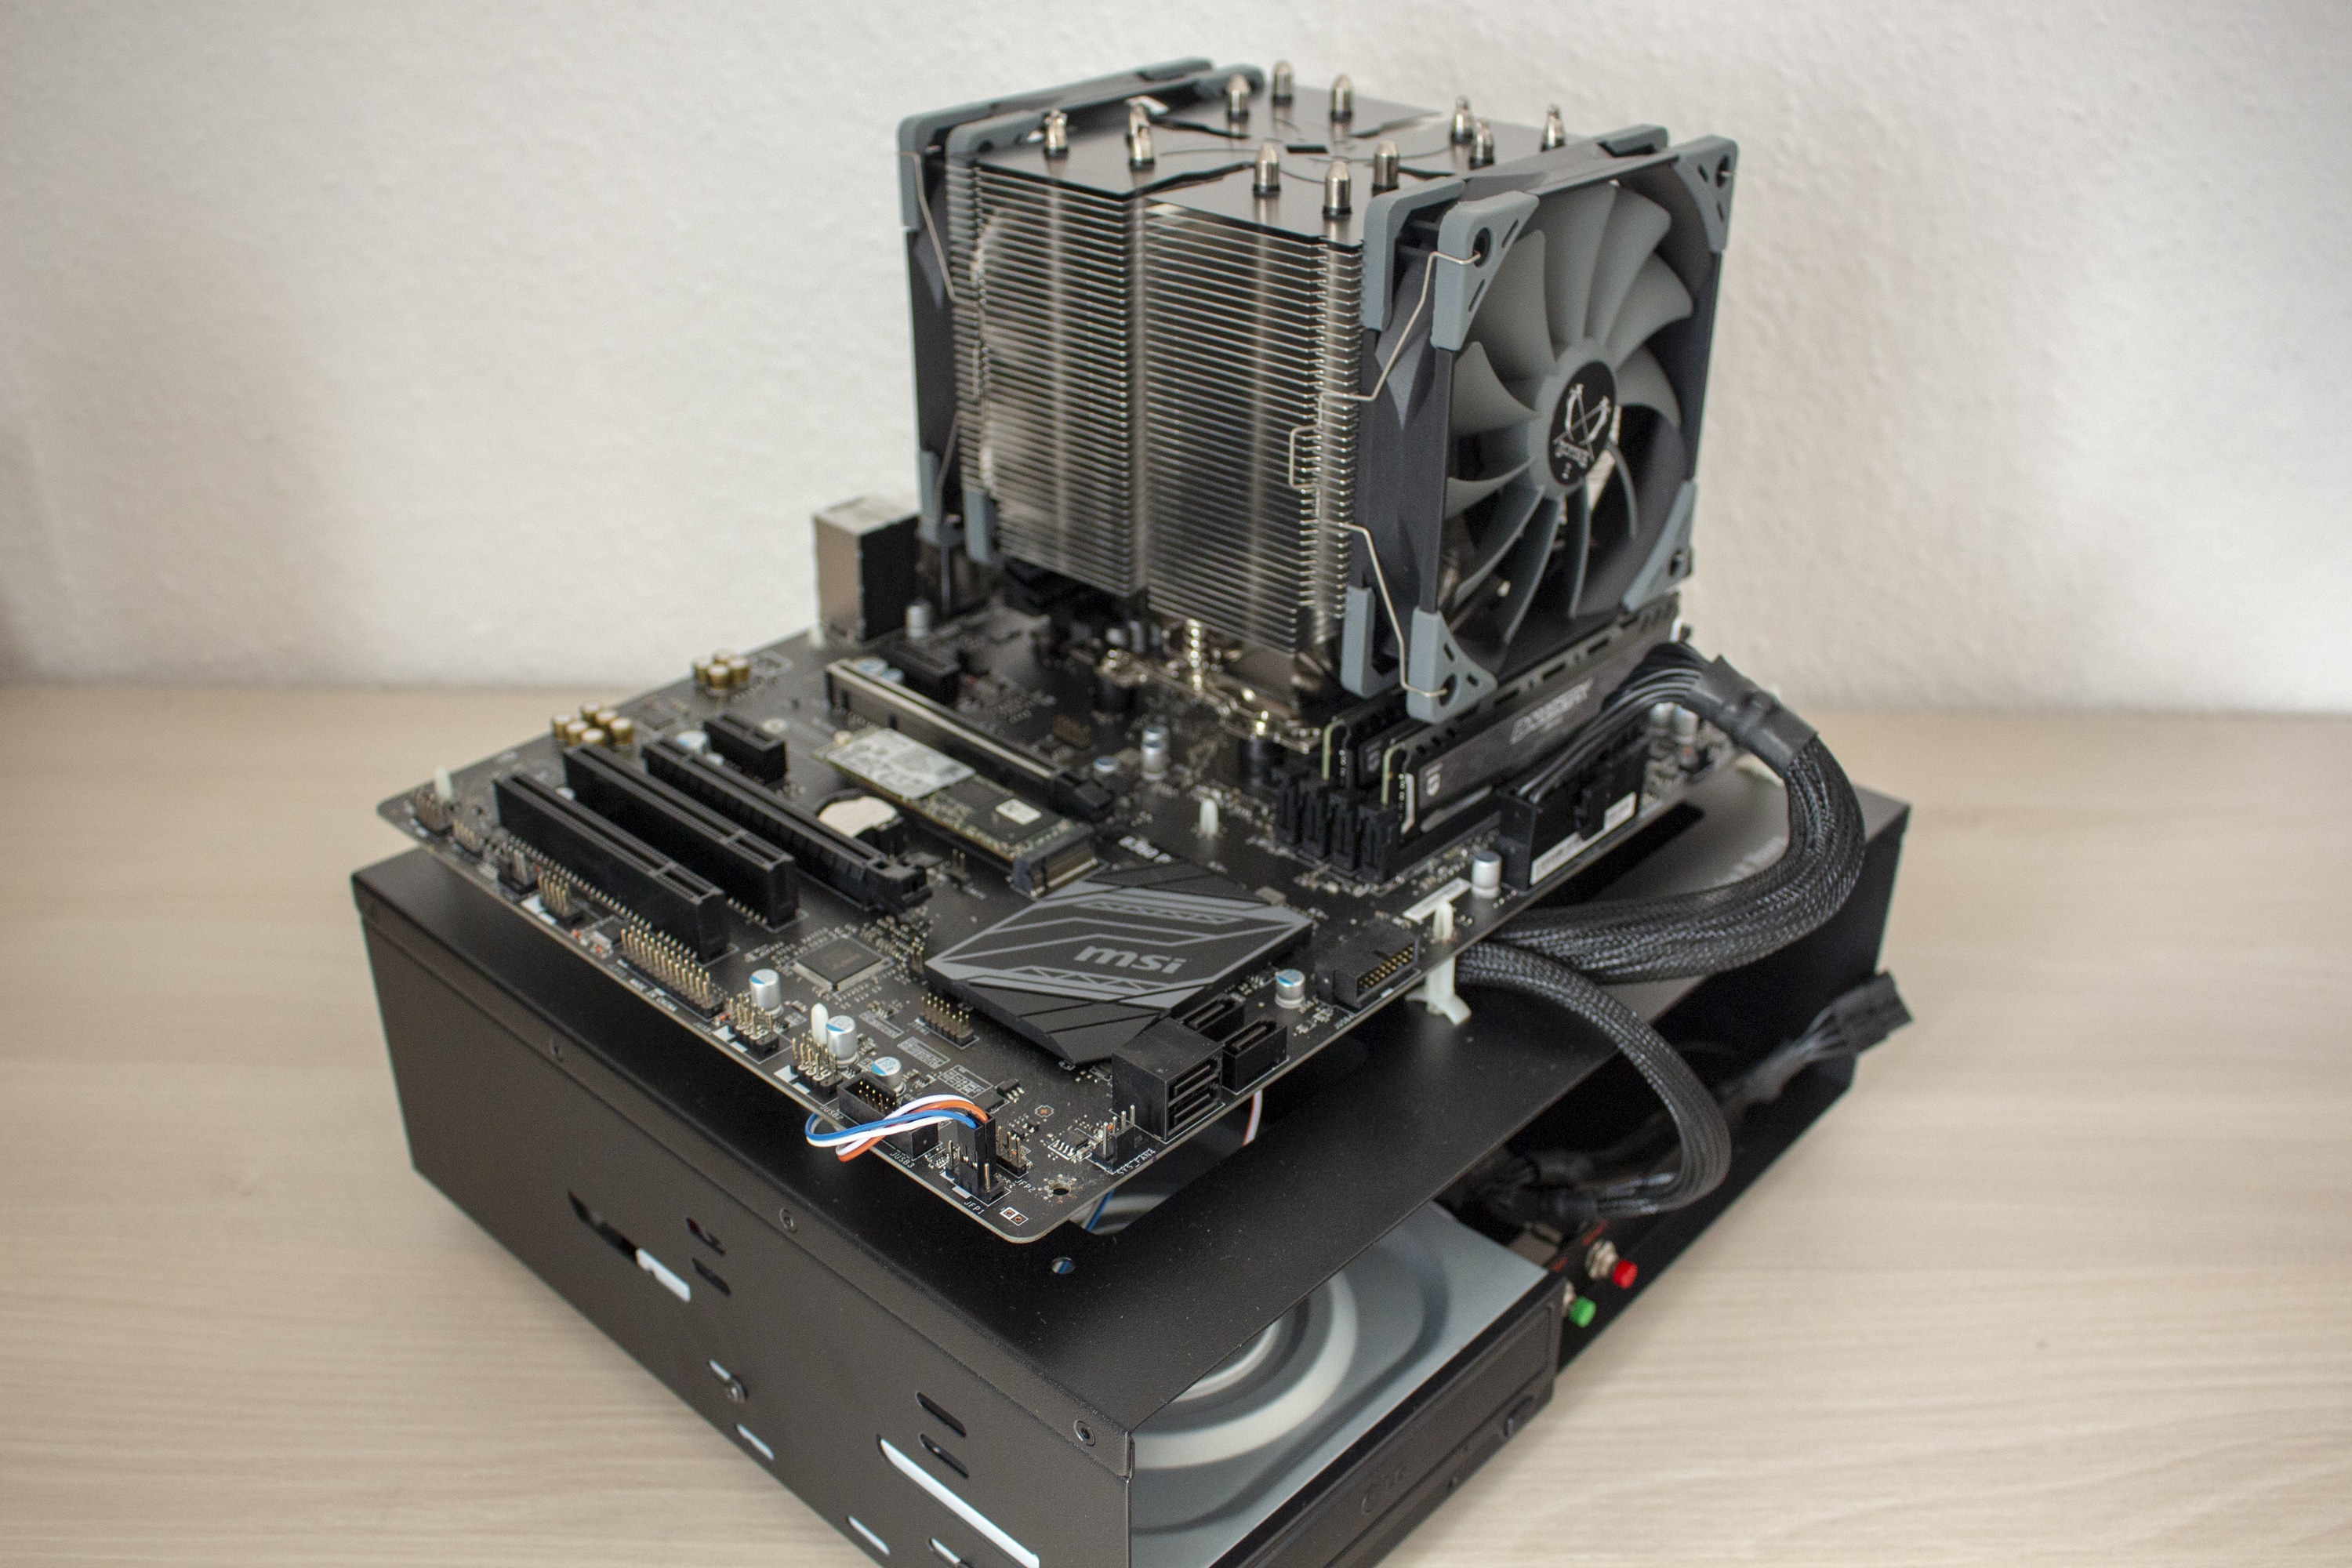 Scythe Ninja 5 - A Powerful CPU Cooler with Two Fans under Test.